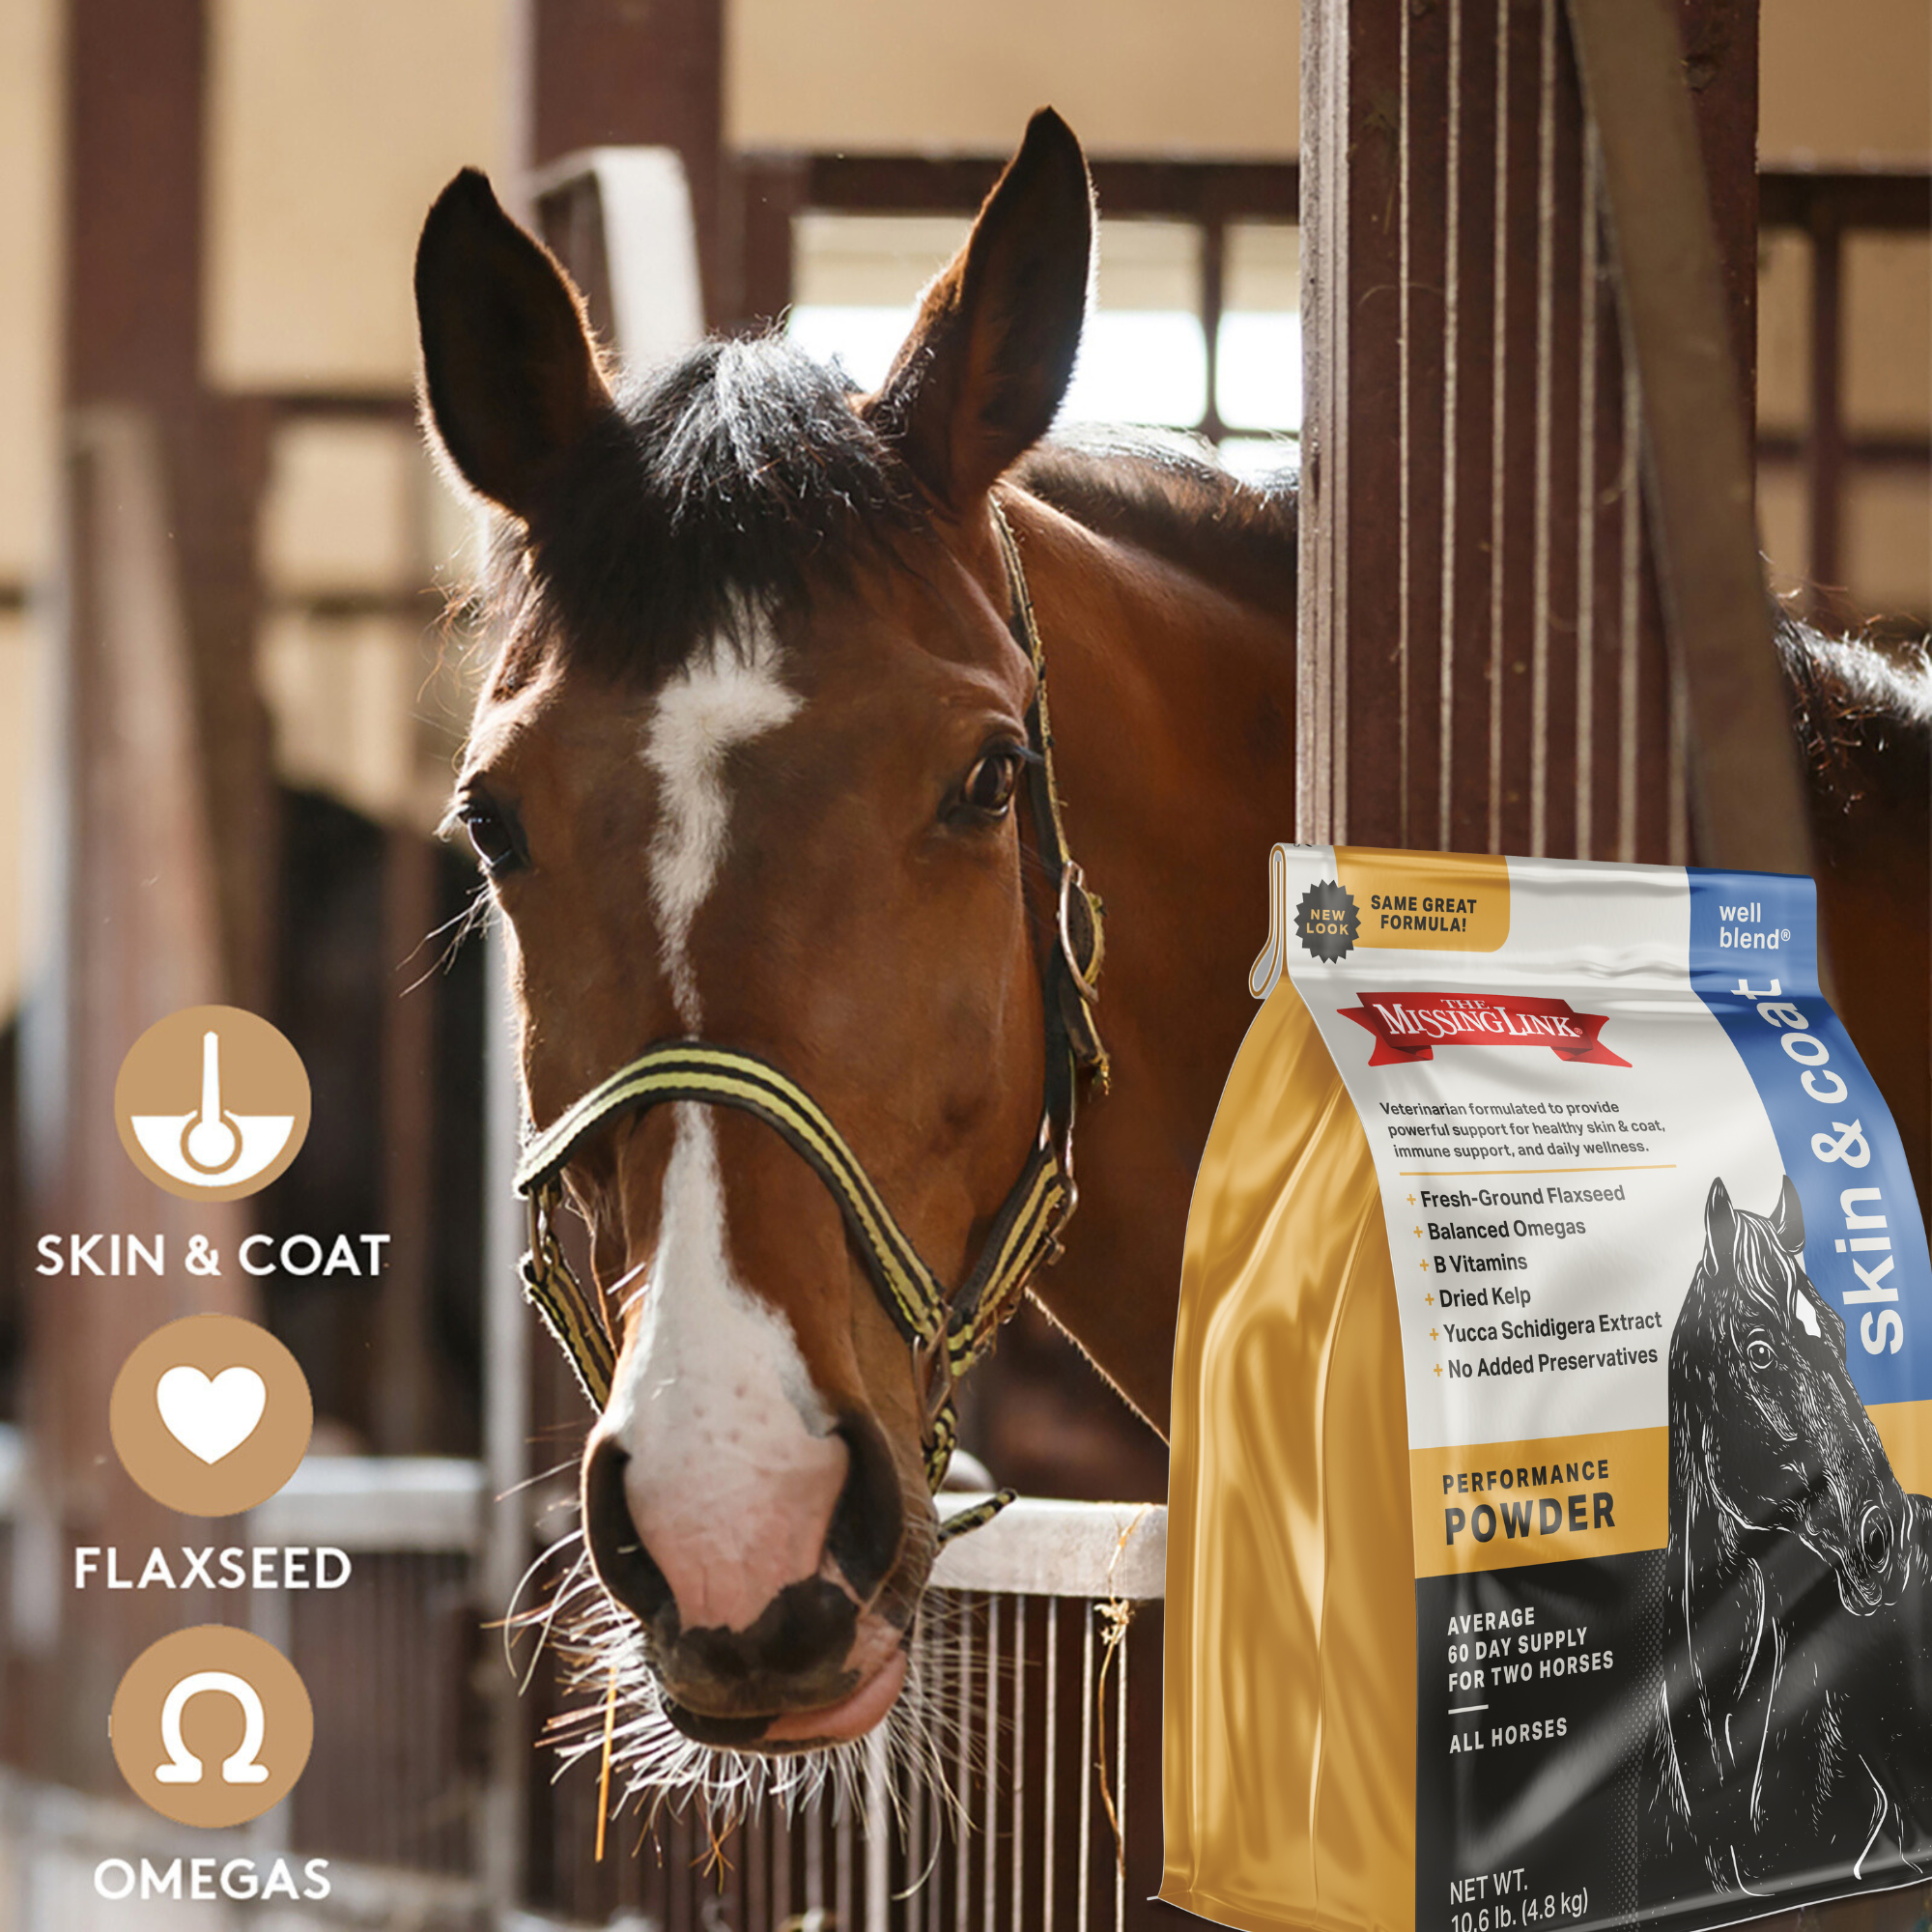 Chestnut horse with a white nose looking out her stall at a bag of The Missing Link Skin & Coat performance powder. New look bag, same great formula including flaxseed and omegas.